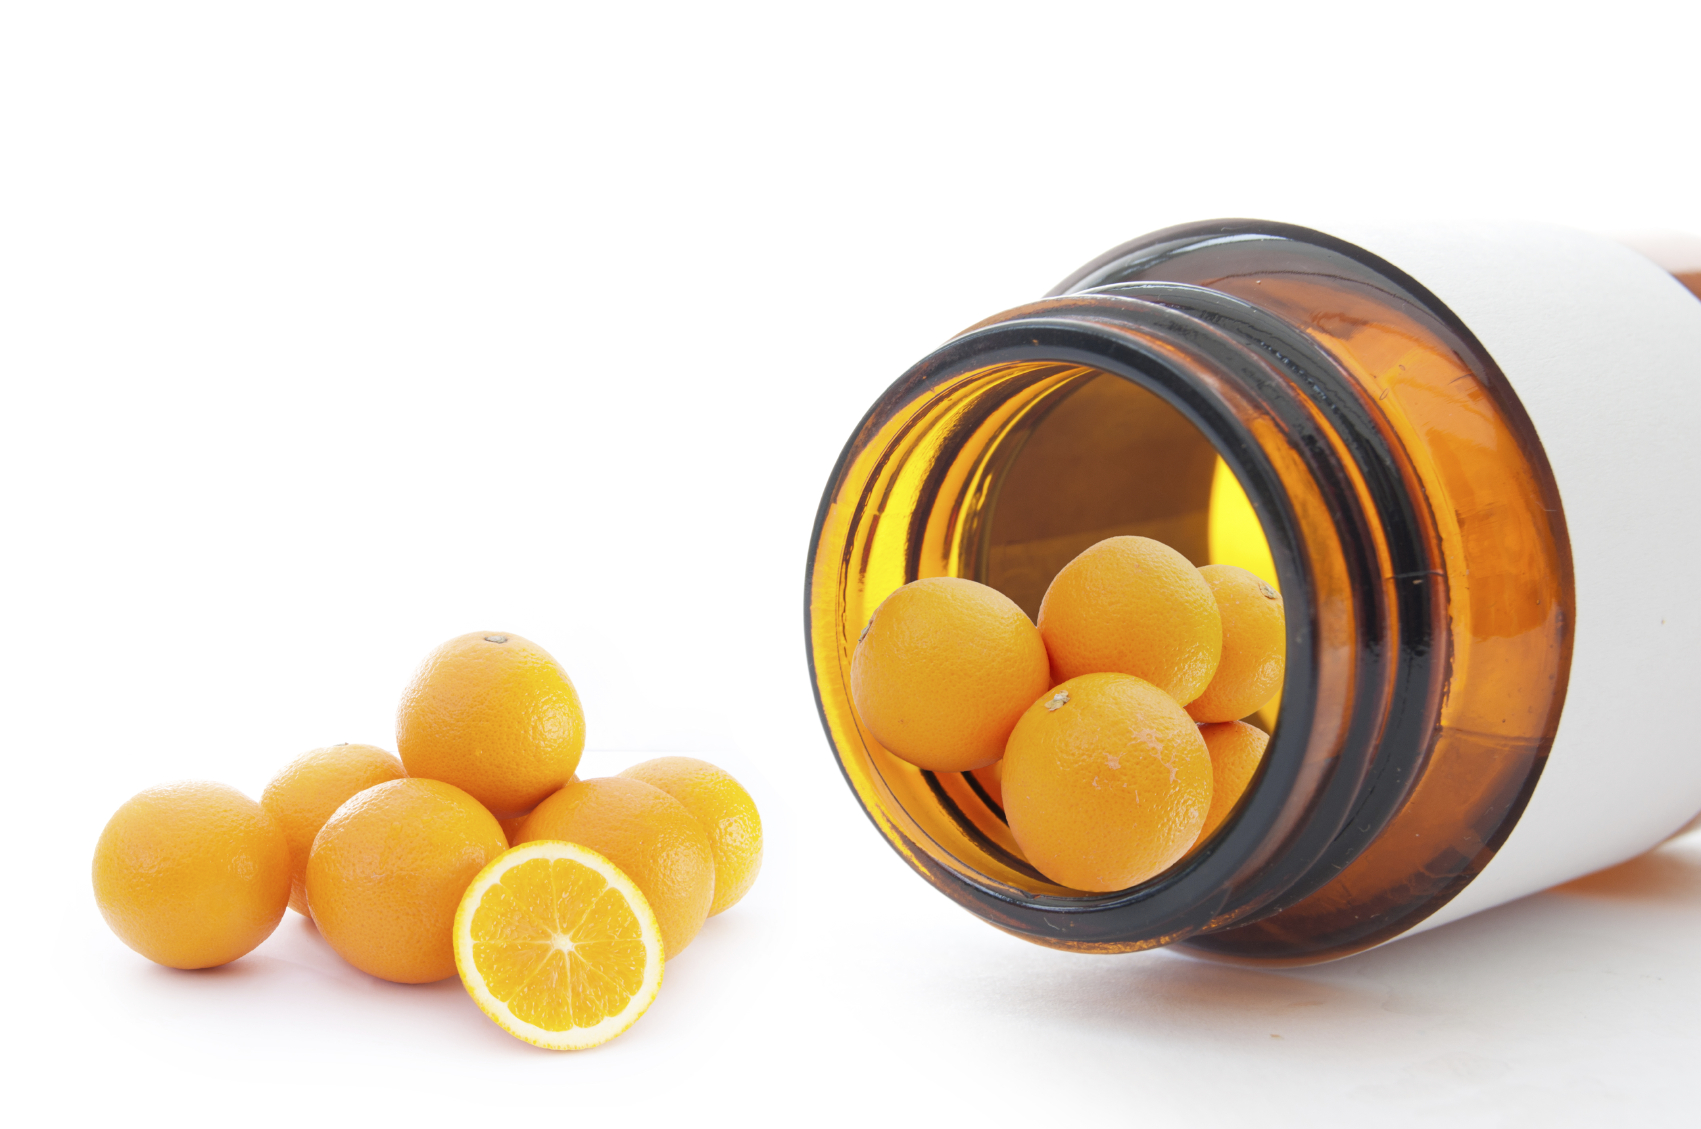 Does vitamin C help with the common cold?